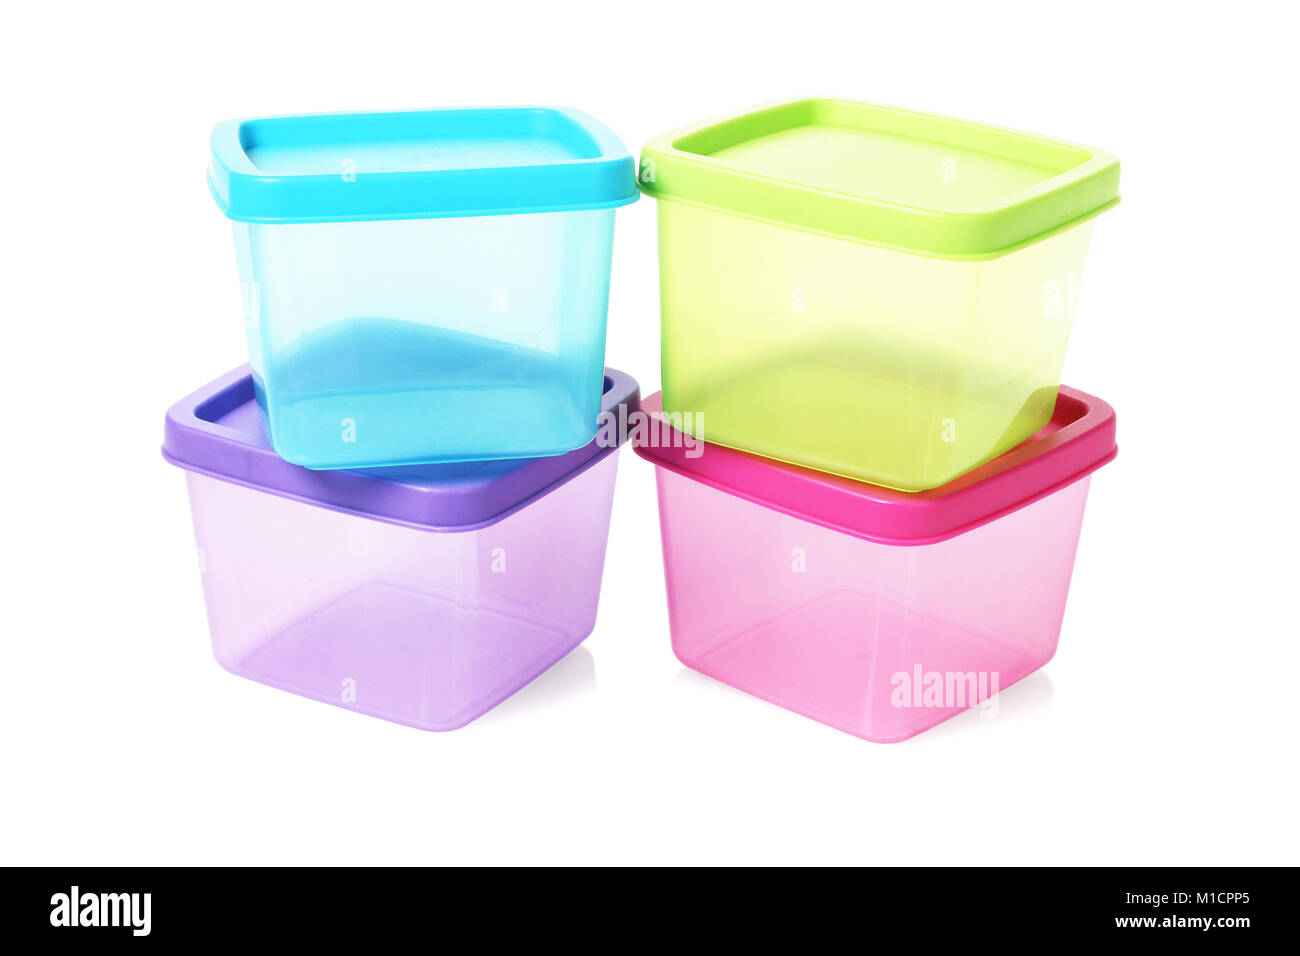 Colourful Square Plastic Containers on White Background Stock Photo